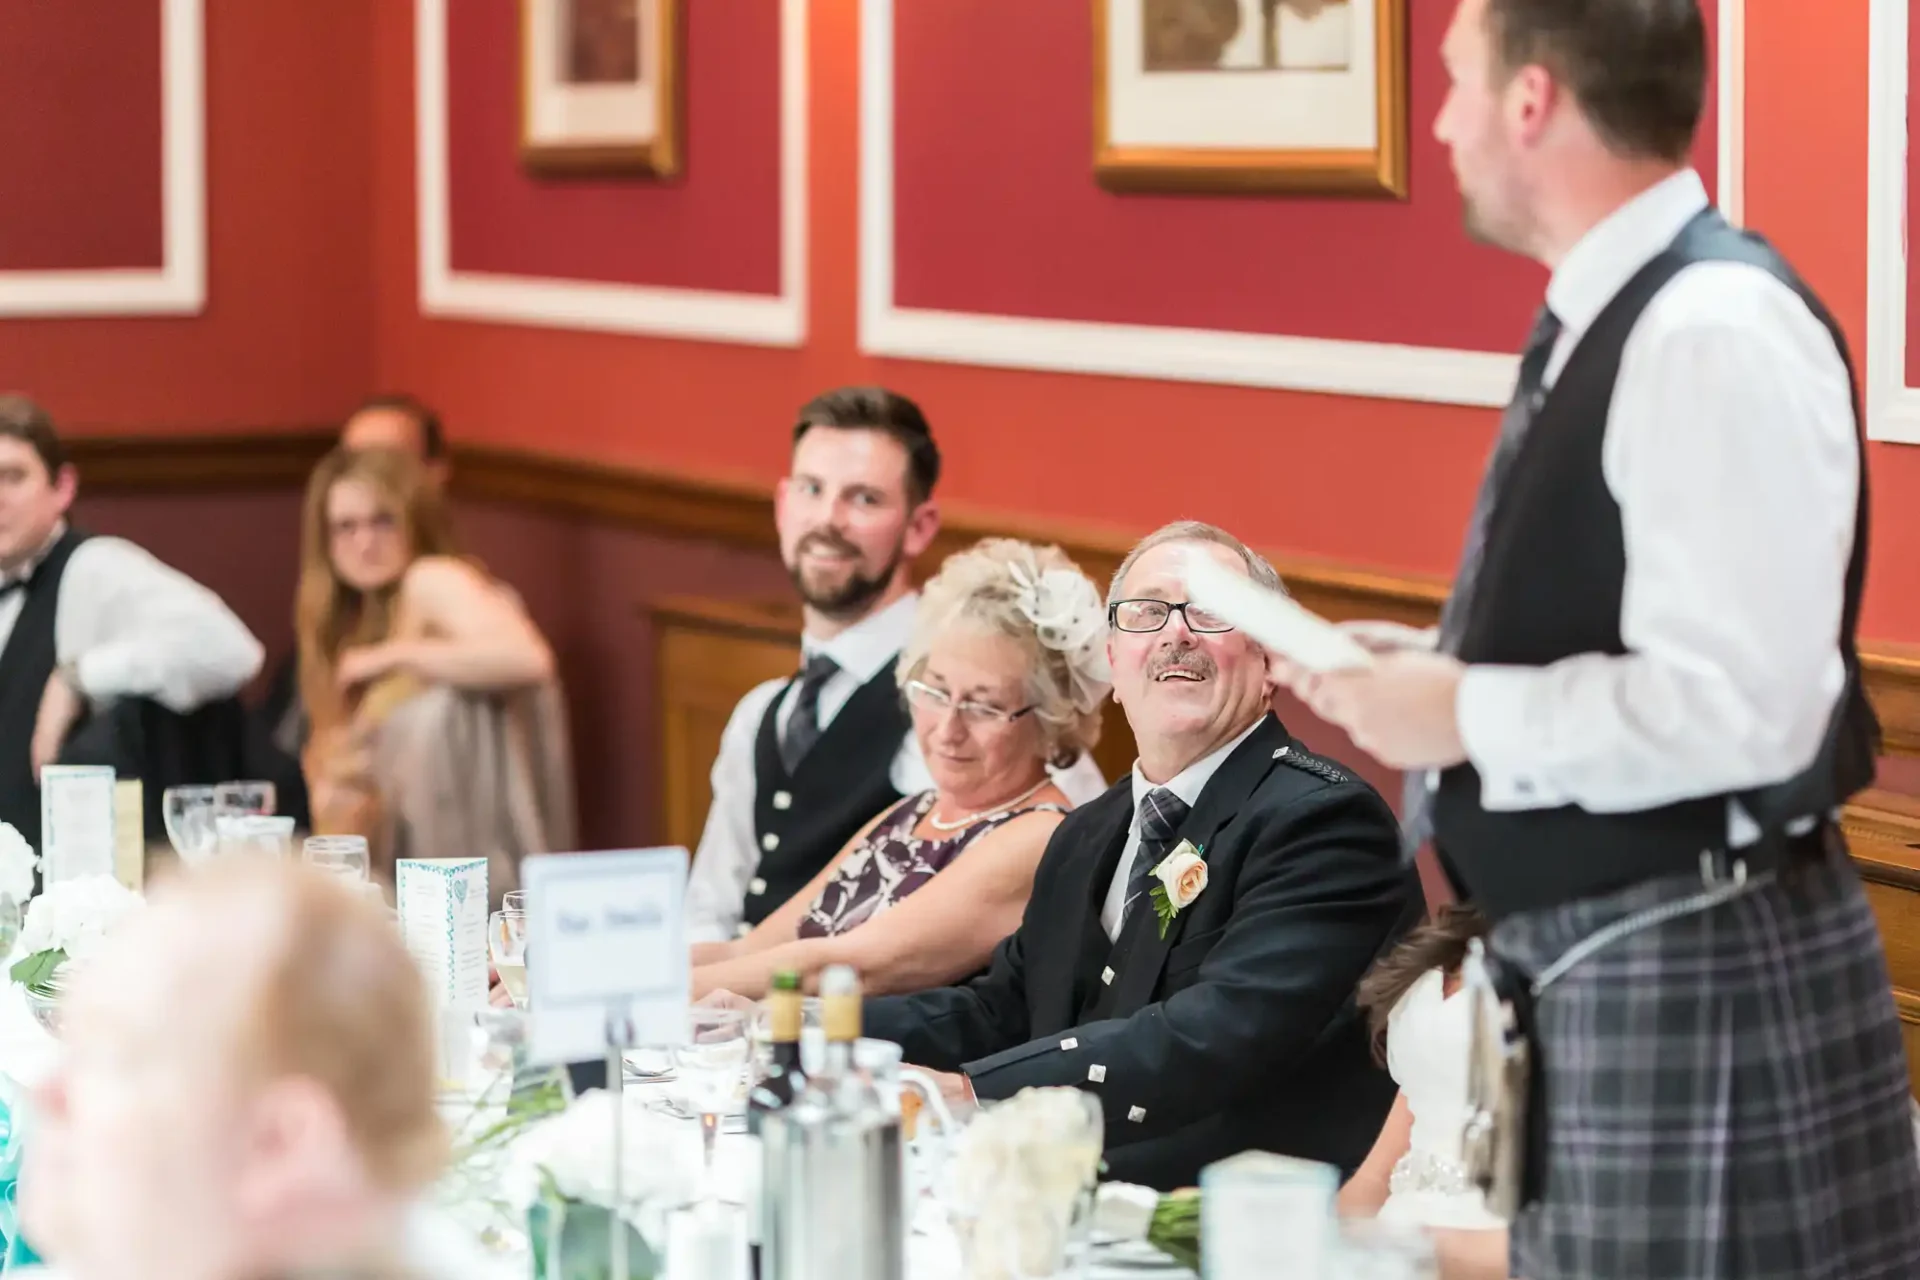 Elderly man with glasses and a boutonniere smiling at a wedding reception, seated between a joyful woman and a younger man, as a waiter in a kilt serves their table.